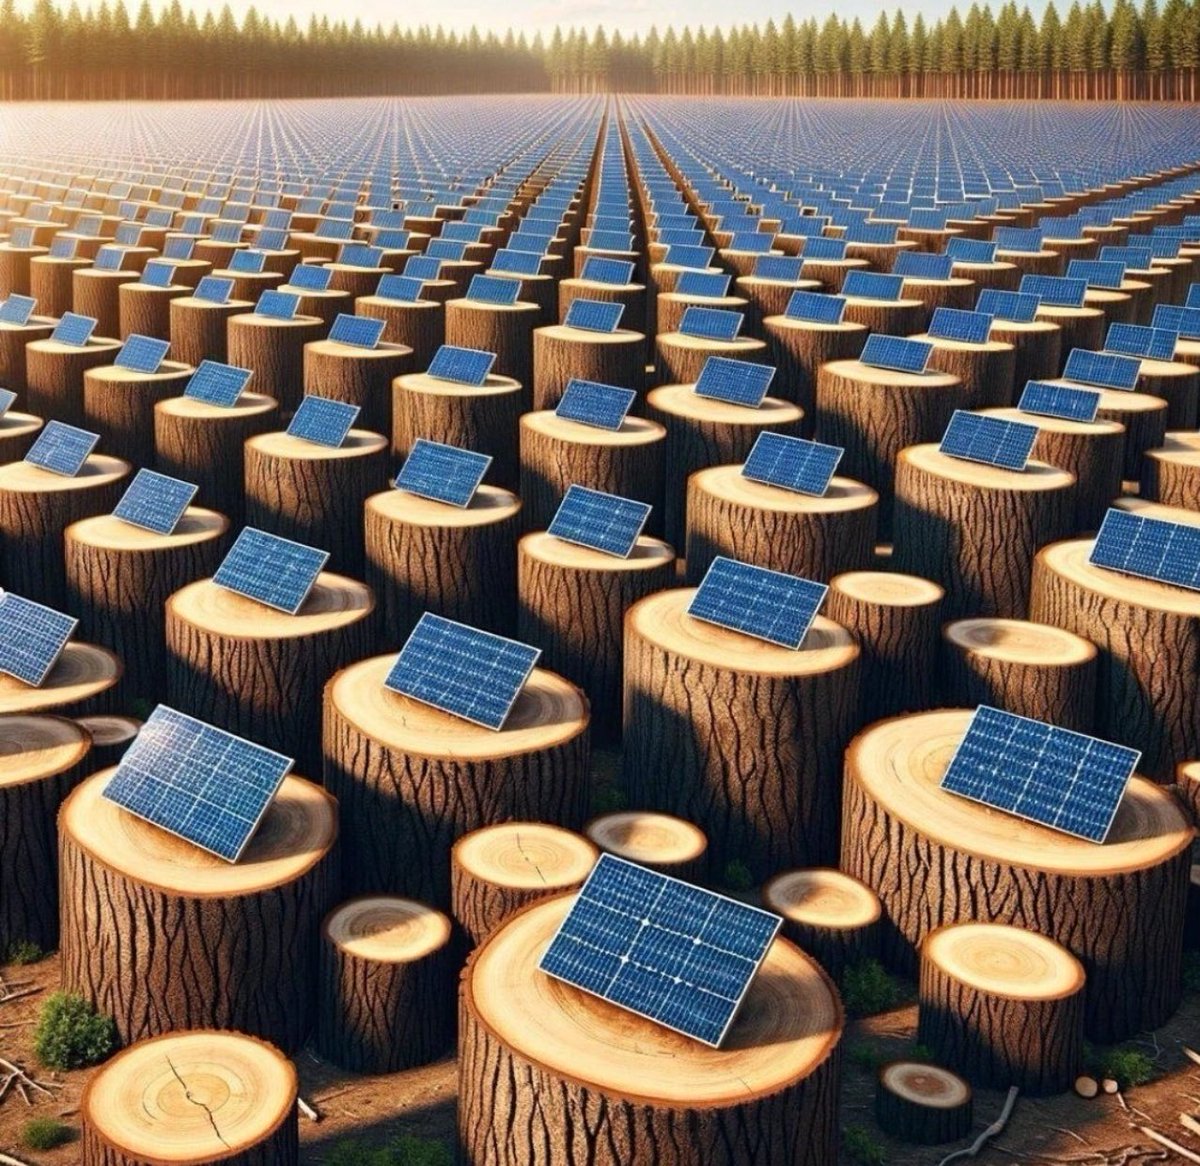 NET ZERO - Hundreds of thousands of hectares, containing millions of CO2 sucking trees all over the world, are being cut down for solar power. Climate ideology doesn’t care about scientific facts. Dissenters will be destroyed. Only the bravest will survive the purge.